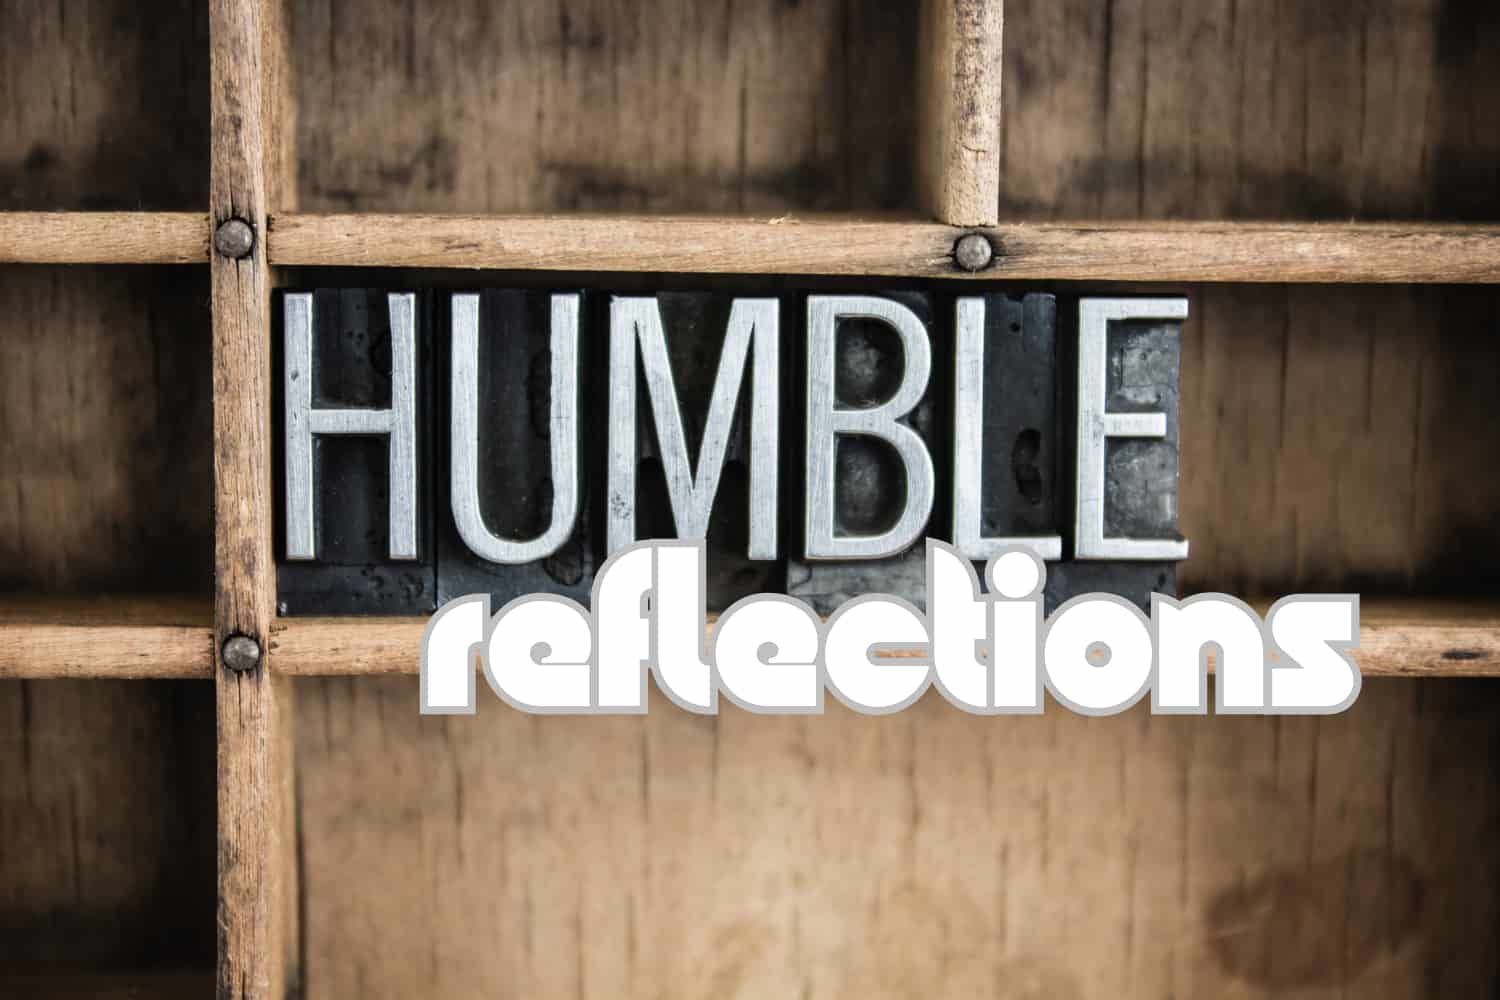 Object%20lesson%20-%20NT%20The%20pharisee%20and%20the%20tax%20collector%20-%20Humble%20reflections-5792de36 Prayer / praying